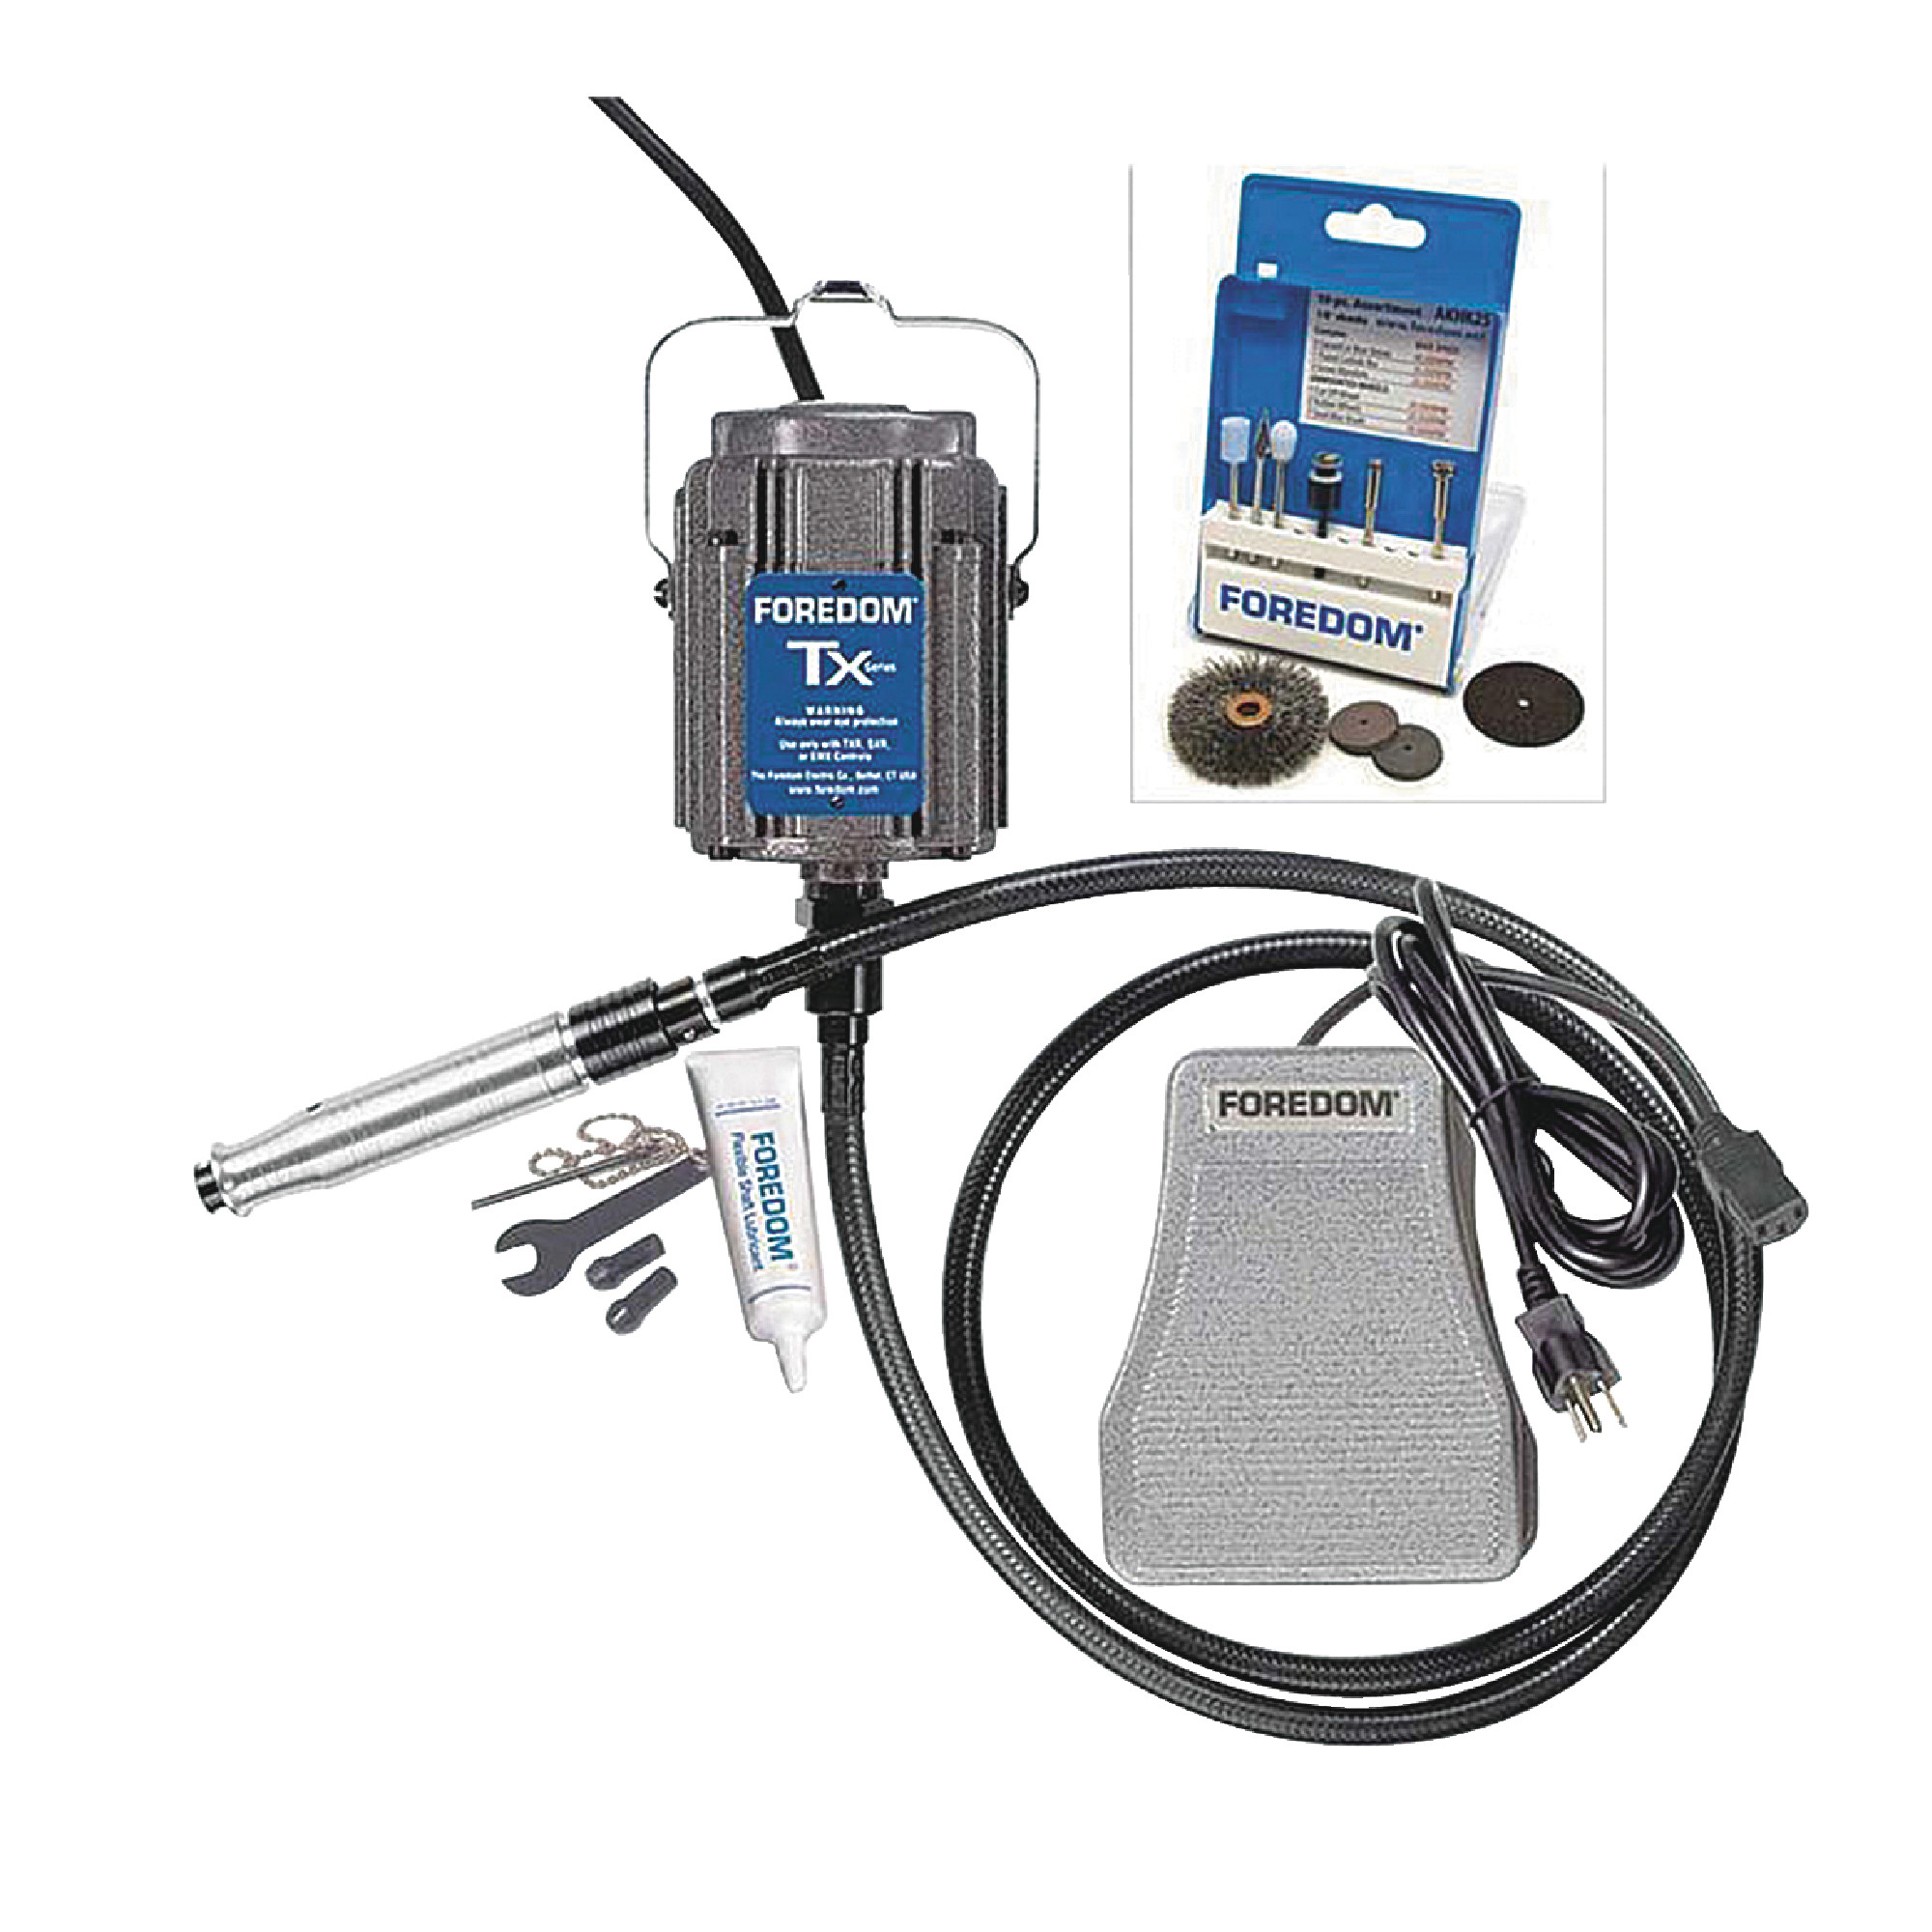 Flexible Shaft & Motor Kit with Accessories